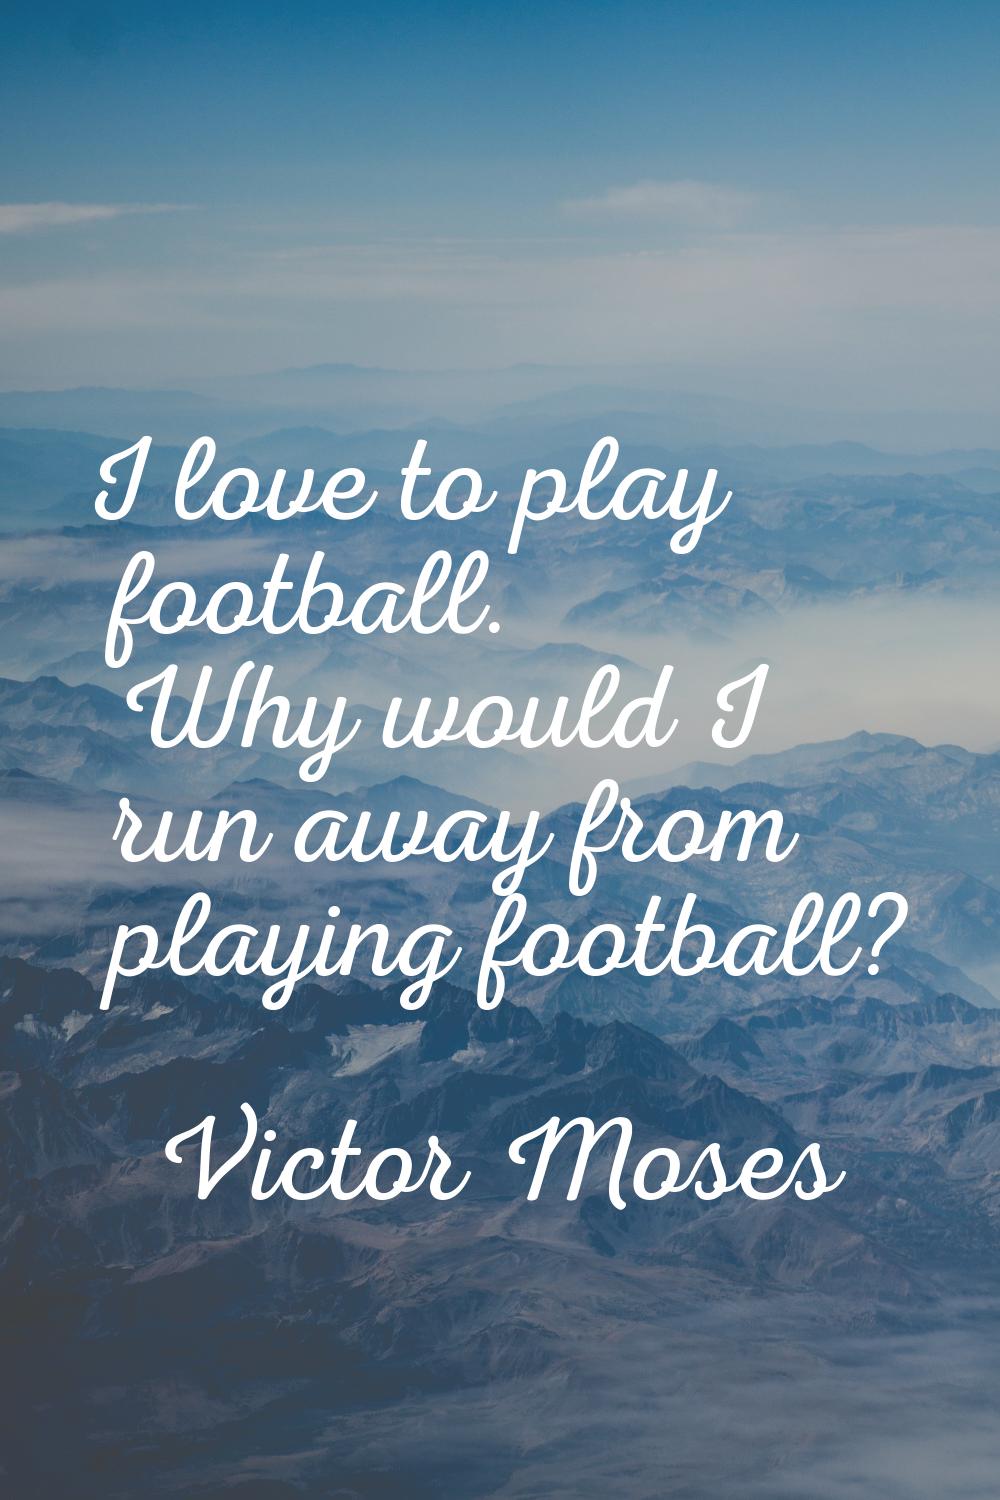 I love to play football. Why would I run away from playing football?